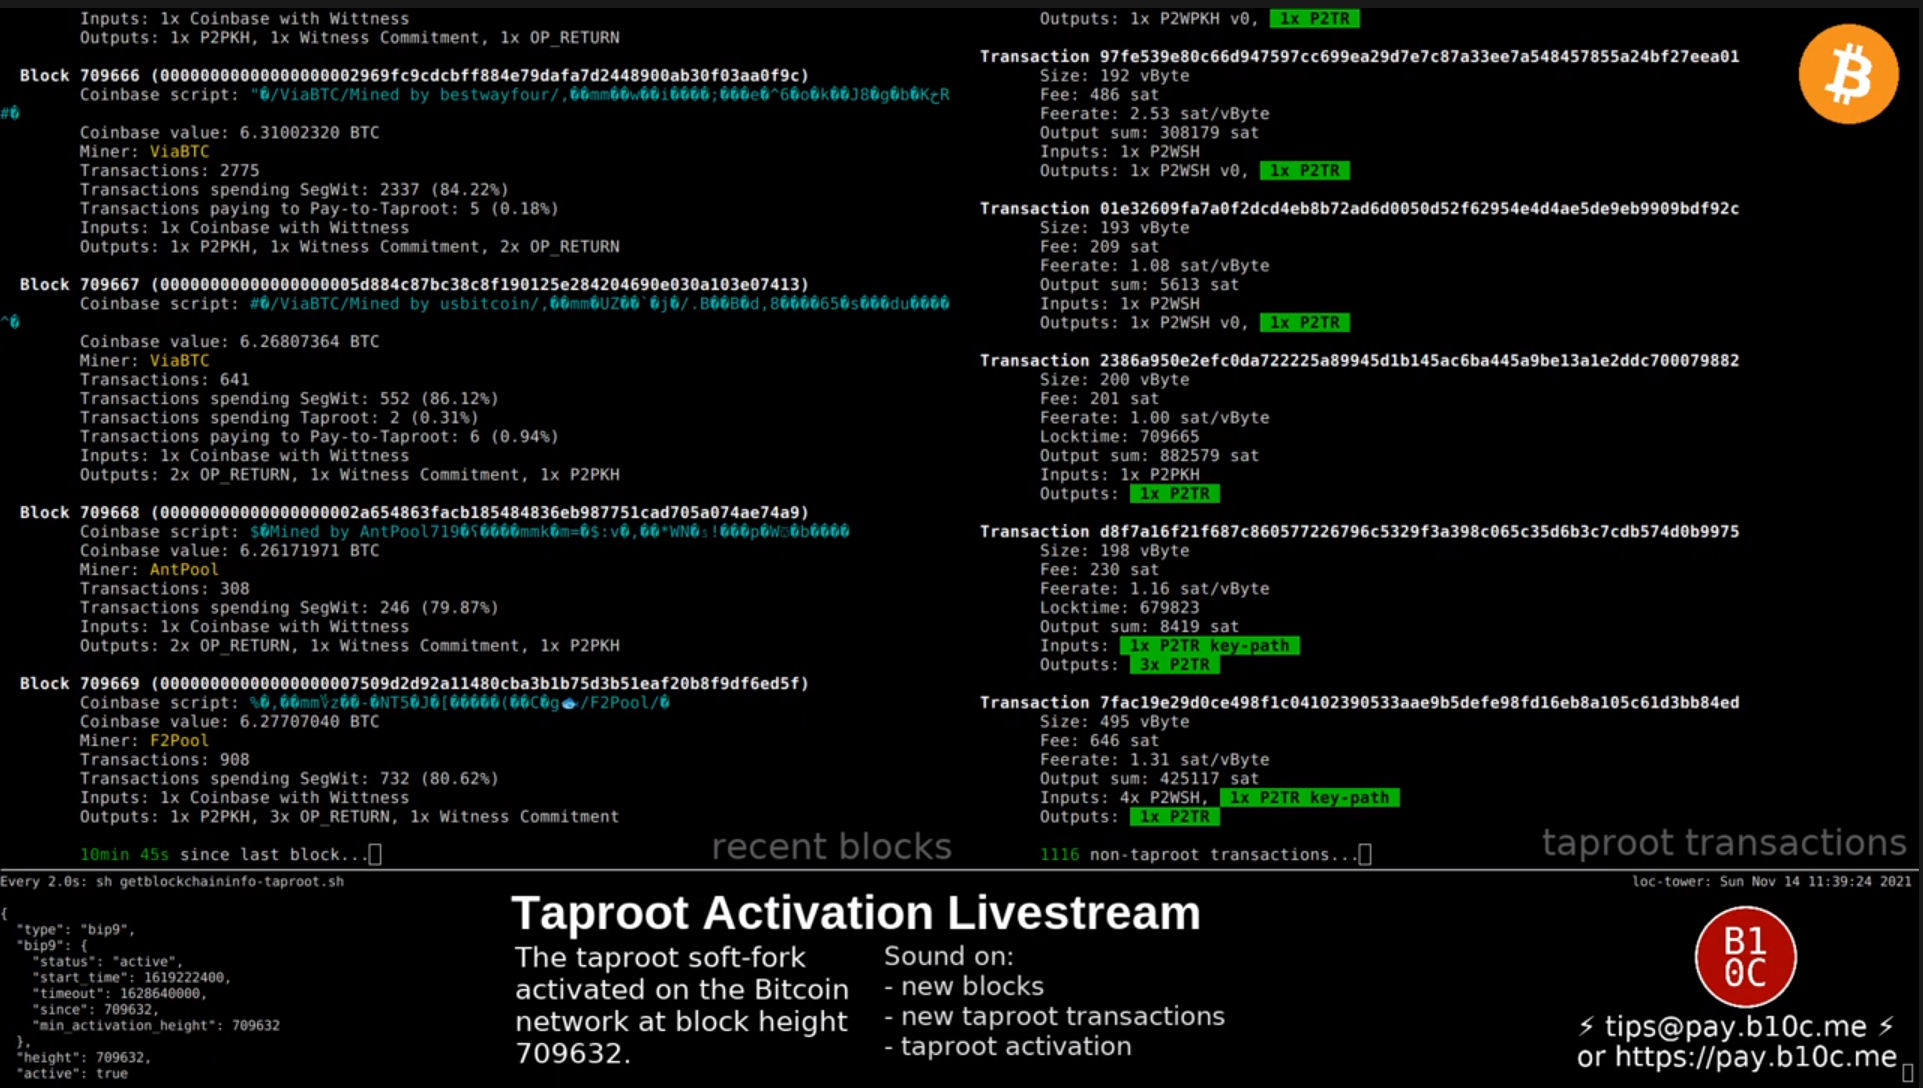 Screenshot of the Taproot Activation Livestream